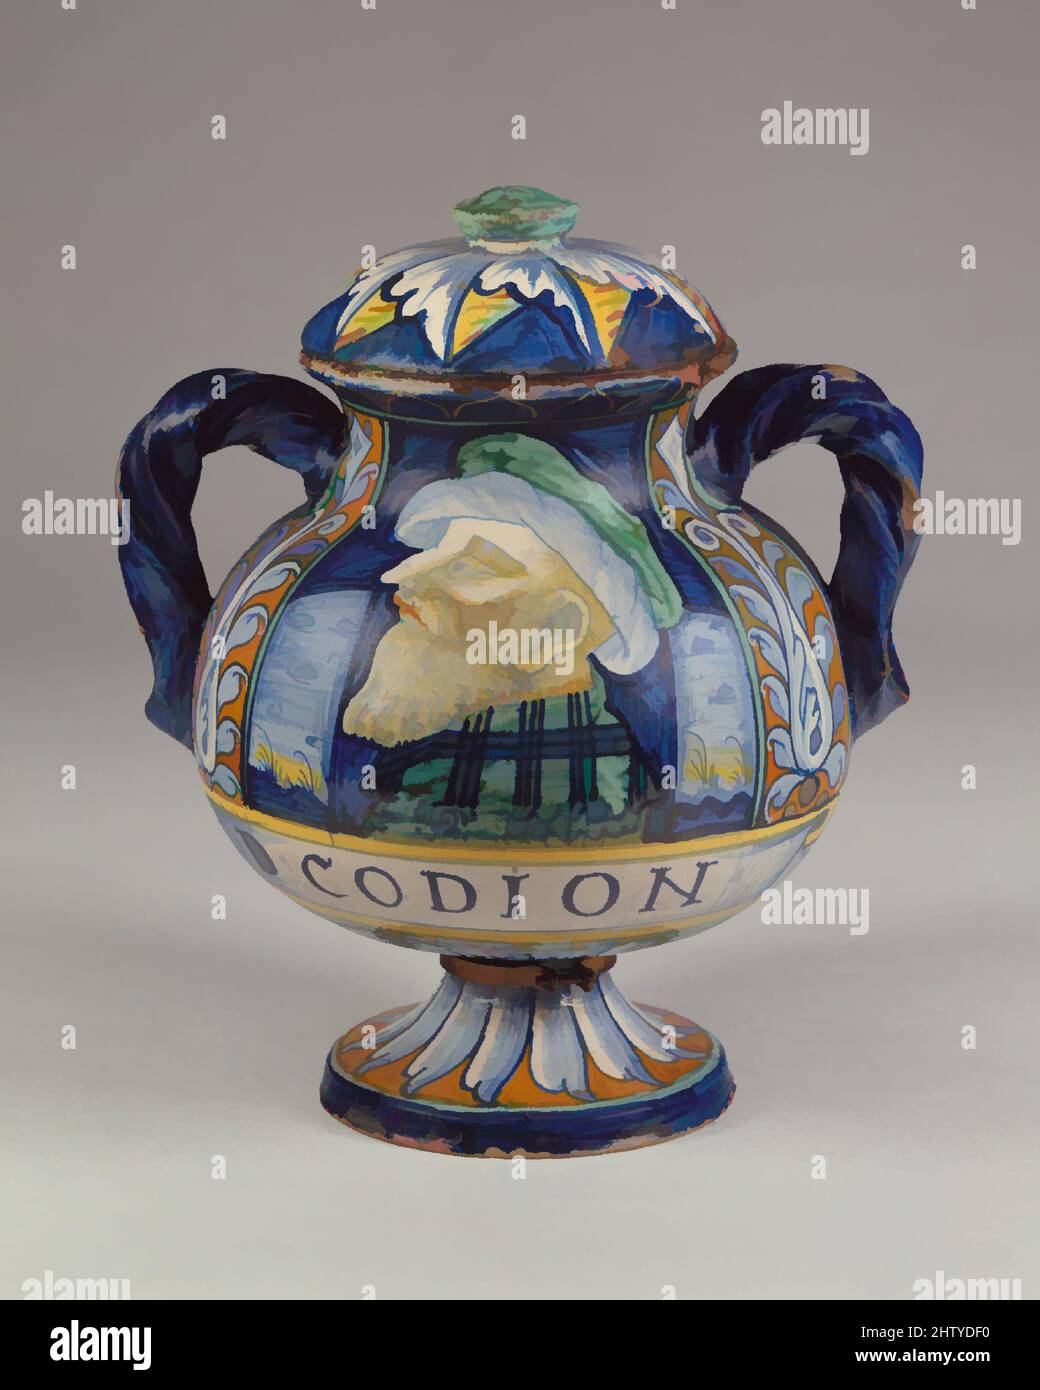 Art inspired by Apothecary vase (vaso da farmacia), ca. 1530–40, Italian, Castelli, Maiolica (tin-glazed earthenware), Height: 9 3/16 in. (23.3 cm), Ceramics-Pottery, Classic works modernized by Artotop with a splash of modernity. Shapes, color and value, eye-catching visual impact on art. Emotions through freedom of artworks in a contemporary way. A timeless message pursuing a wildly creative new direction. Artists turning to the digital medium and creating the Artotop NFT Stock Photo